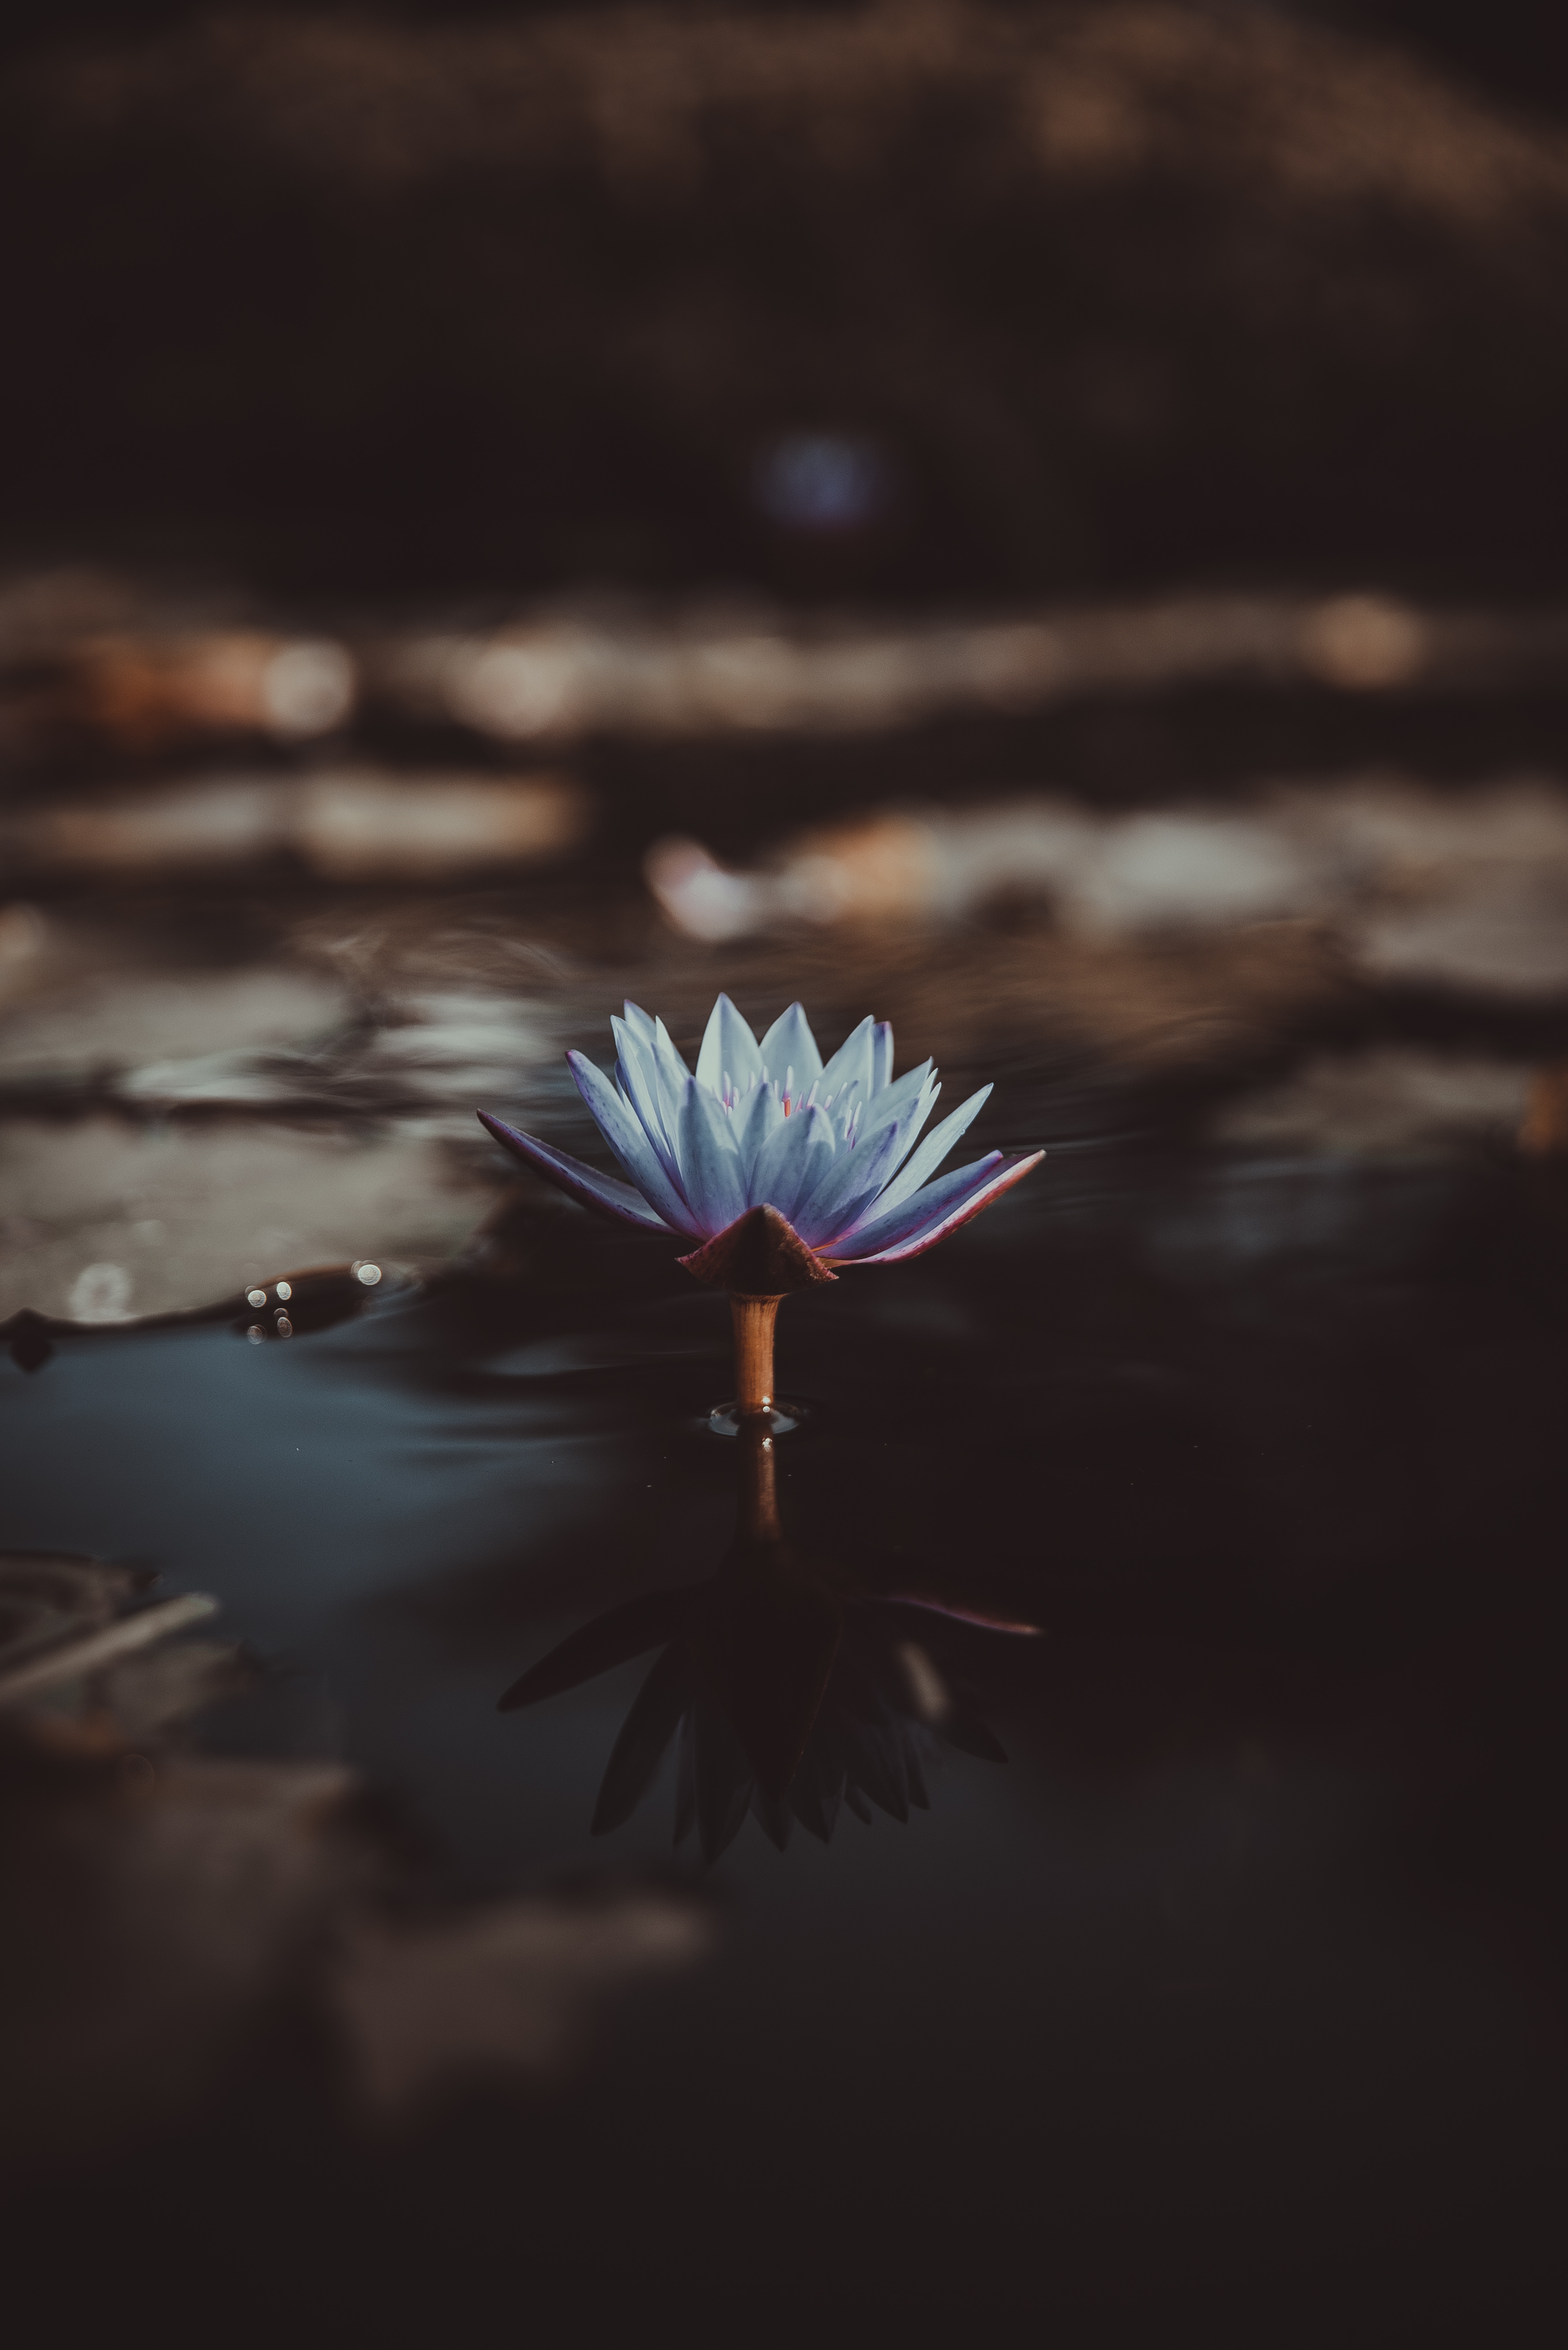 water lily, water, flower, flowers, blur, smooth, nymphea, nymphe phone background